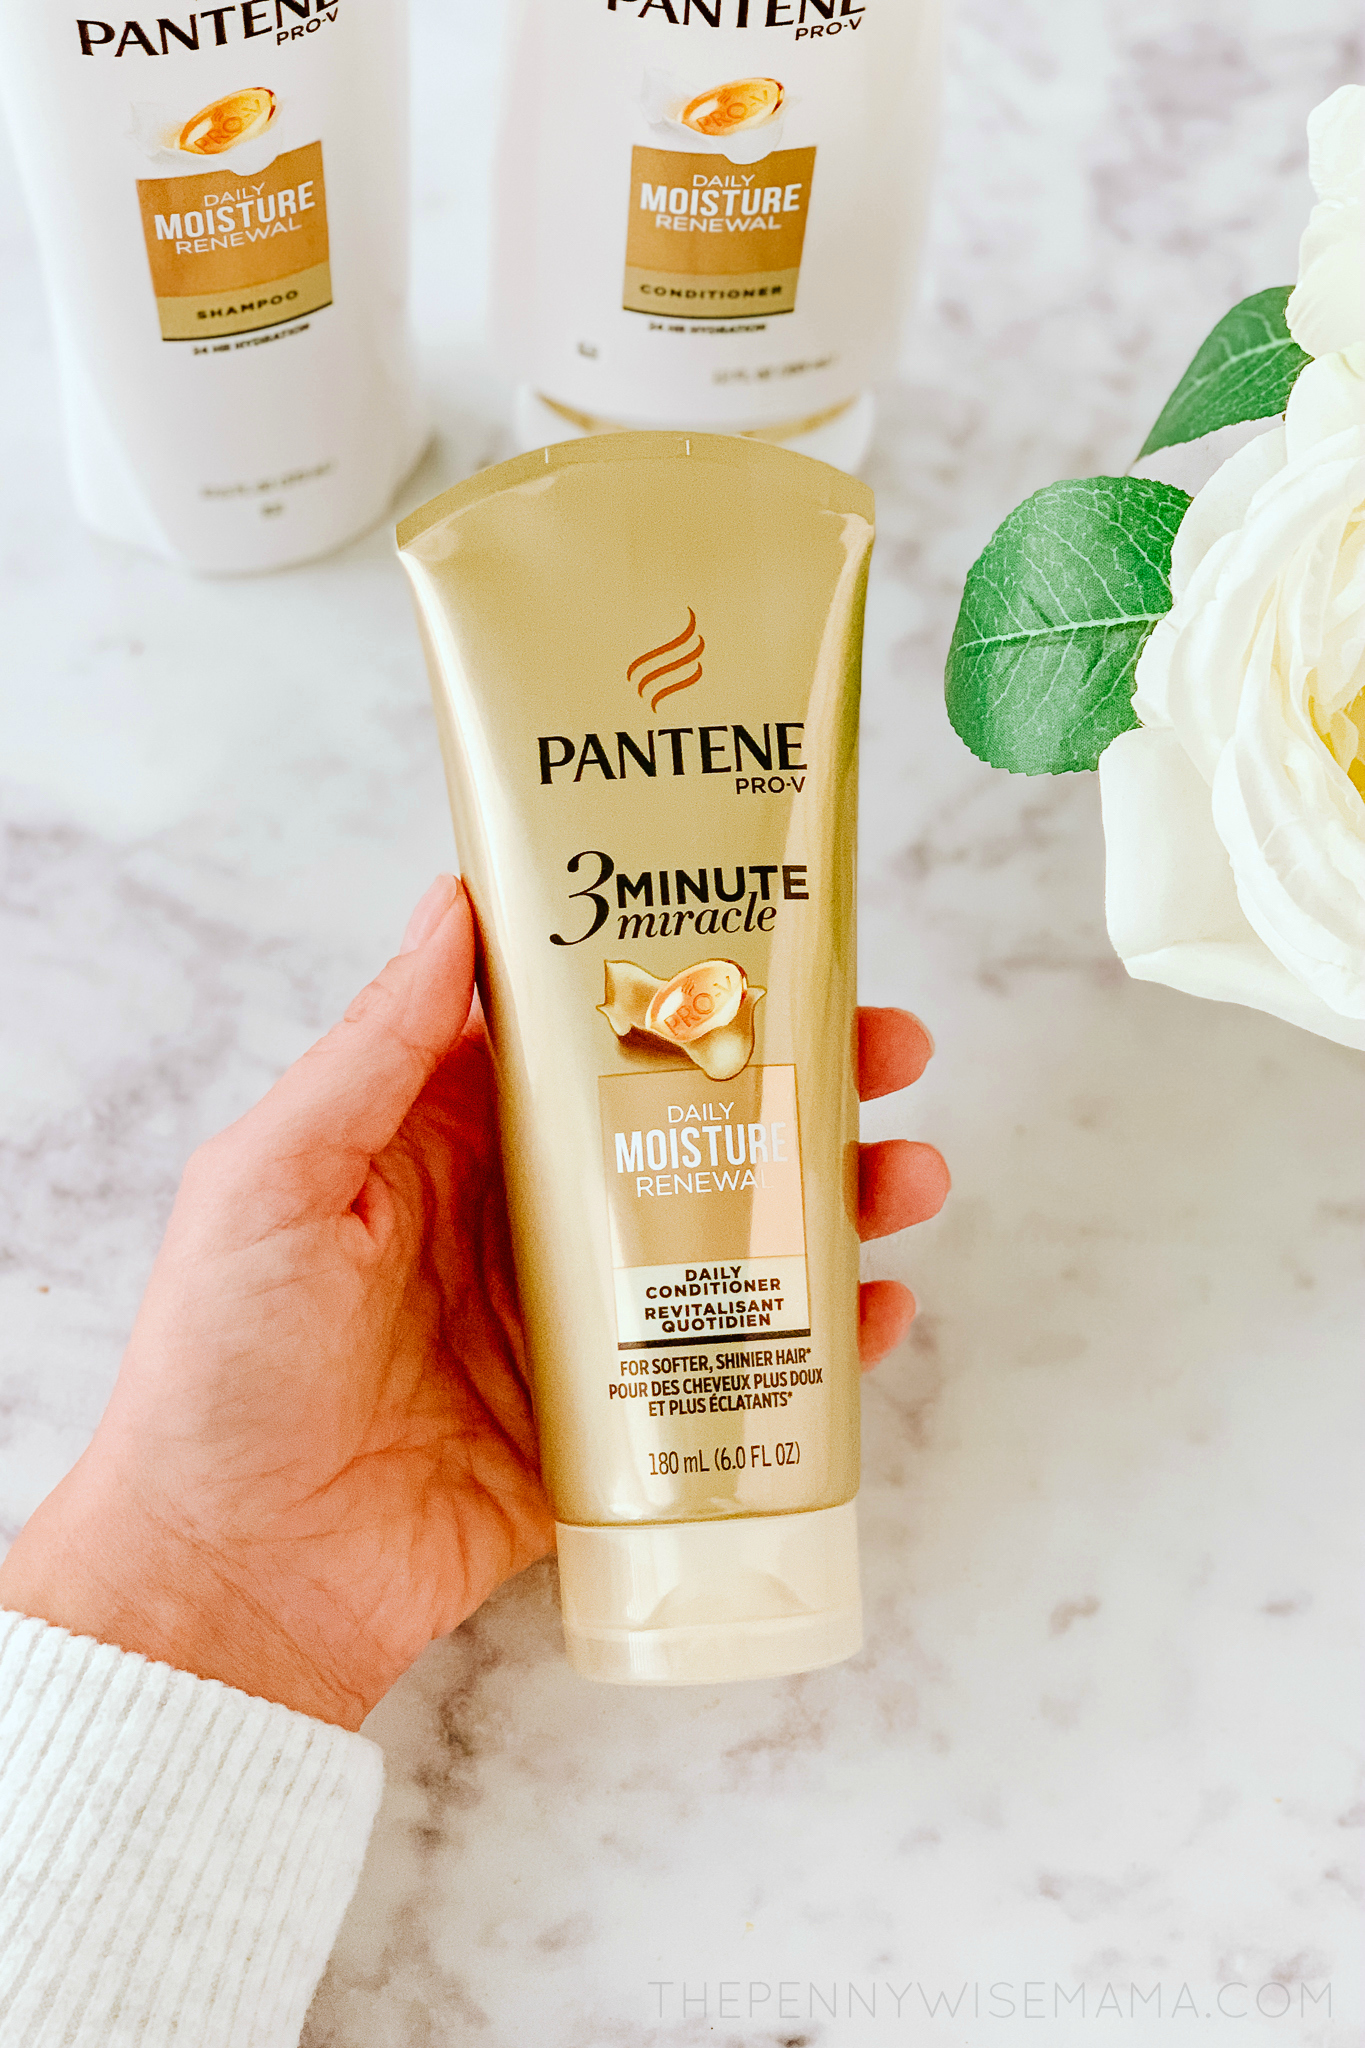 Pantene Daily Moisture Renewal 3 Minute Miracle Daily Conditioner